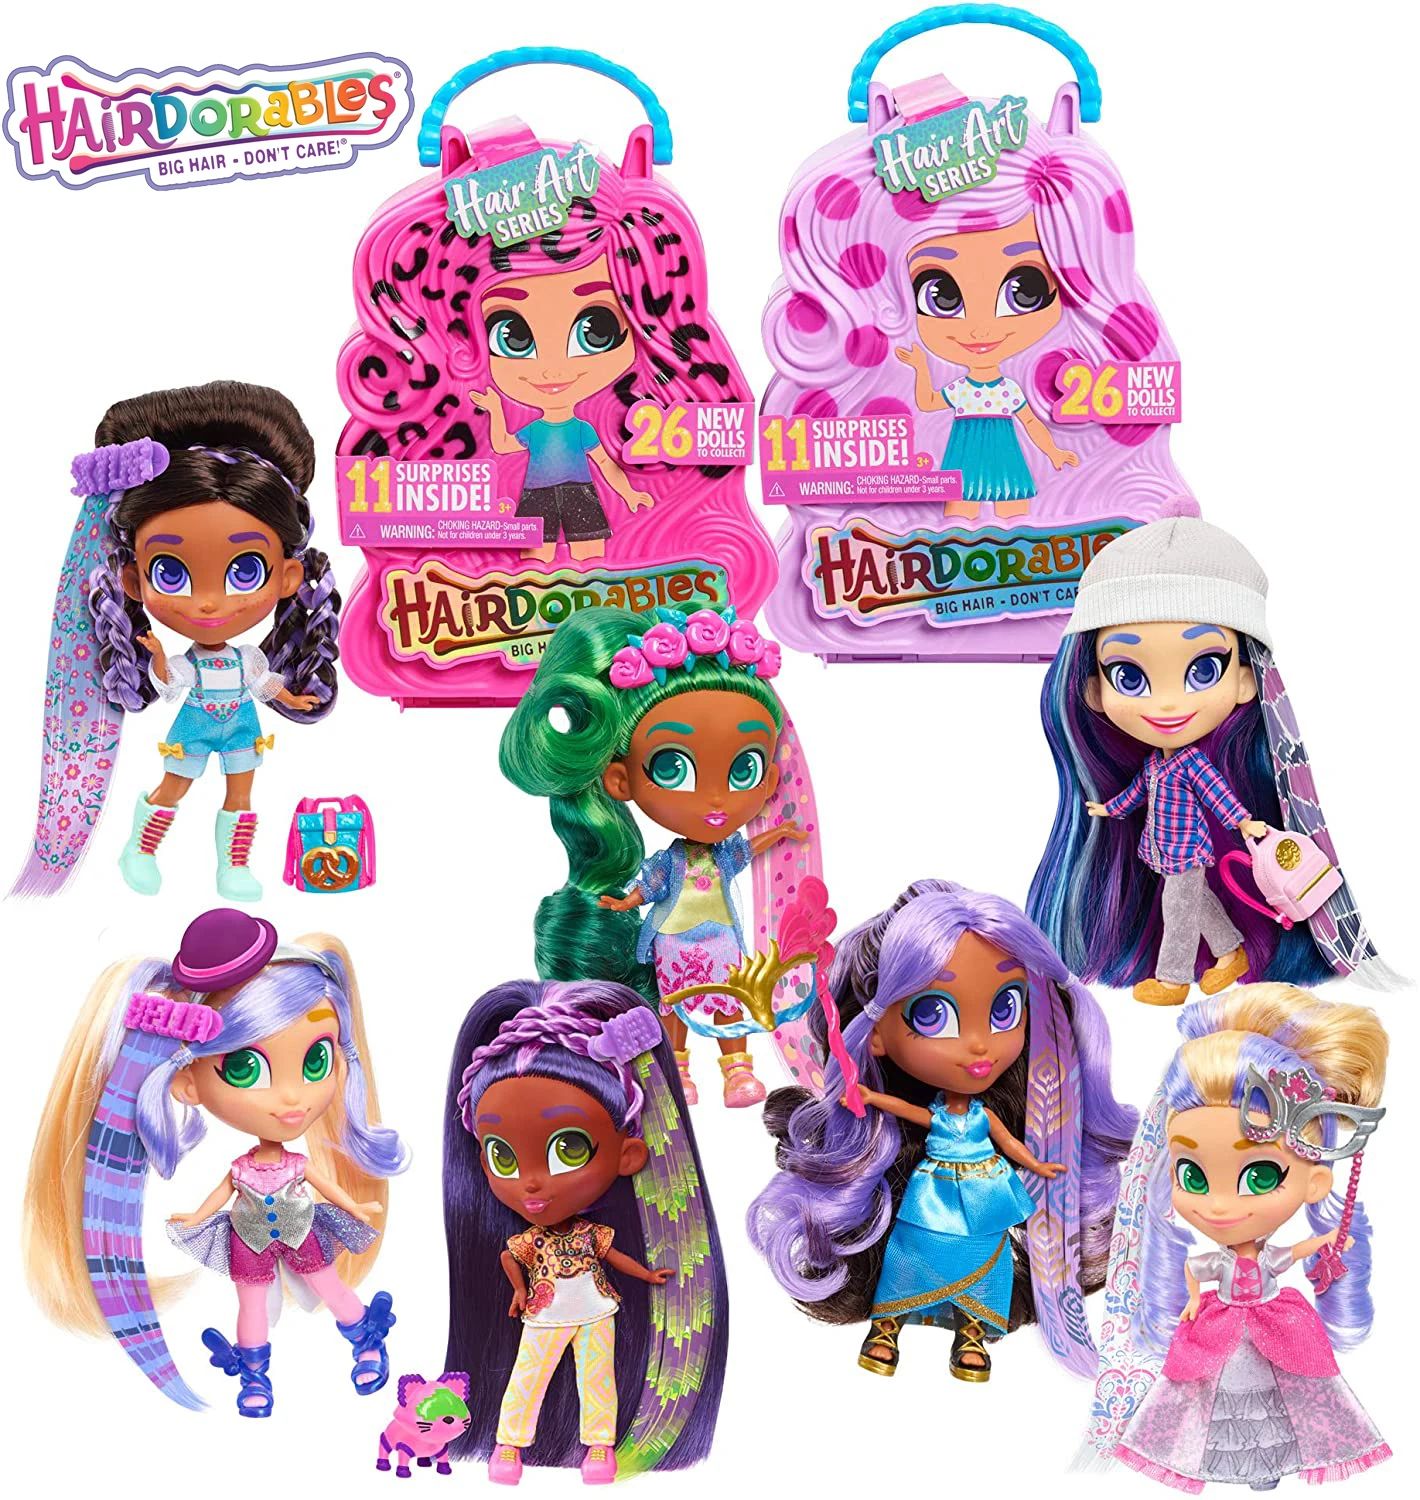 

Original Hairdorables Series 5 Collectible Dolls Sets Surprise Toys Birthday Gift Kids Dolls Girls Playsets Blind Box Surprise